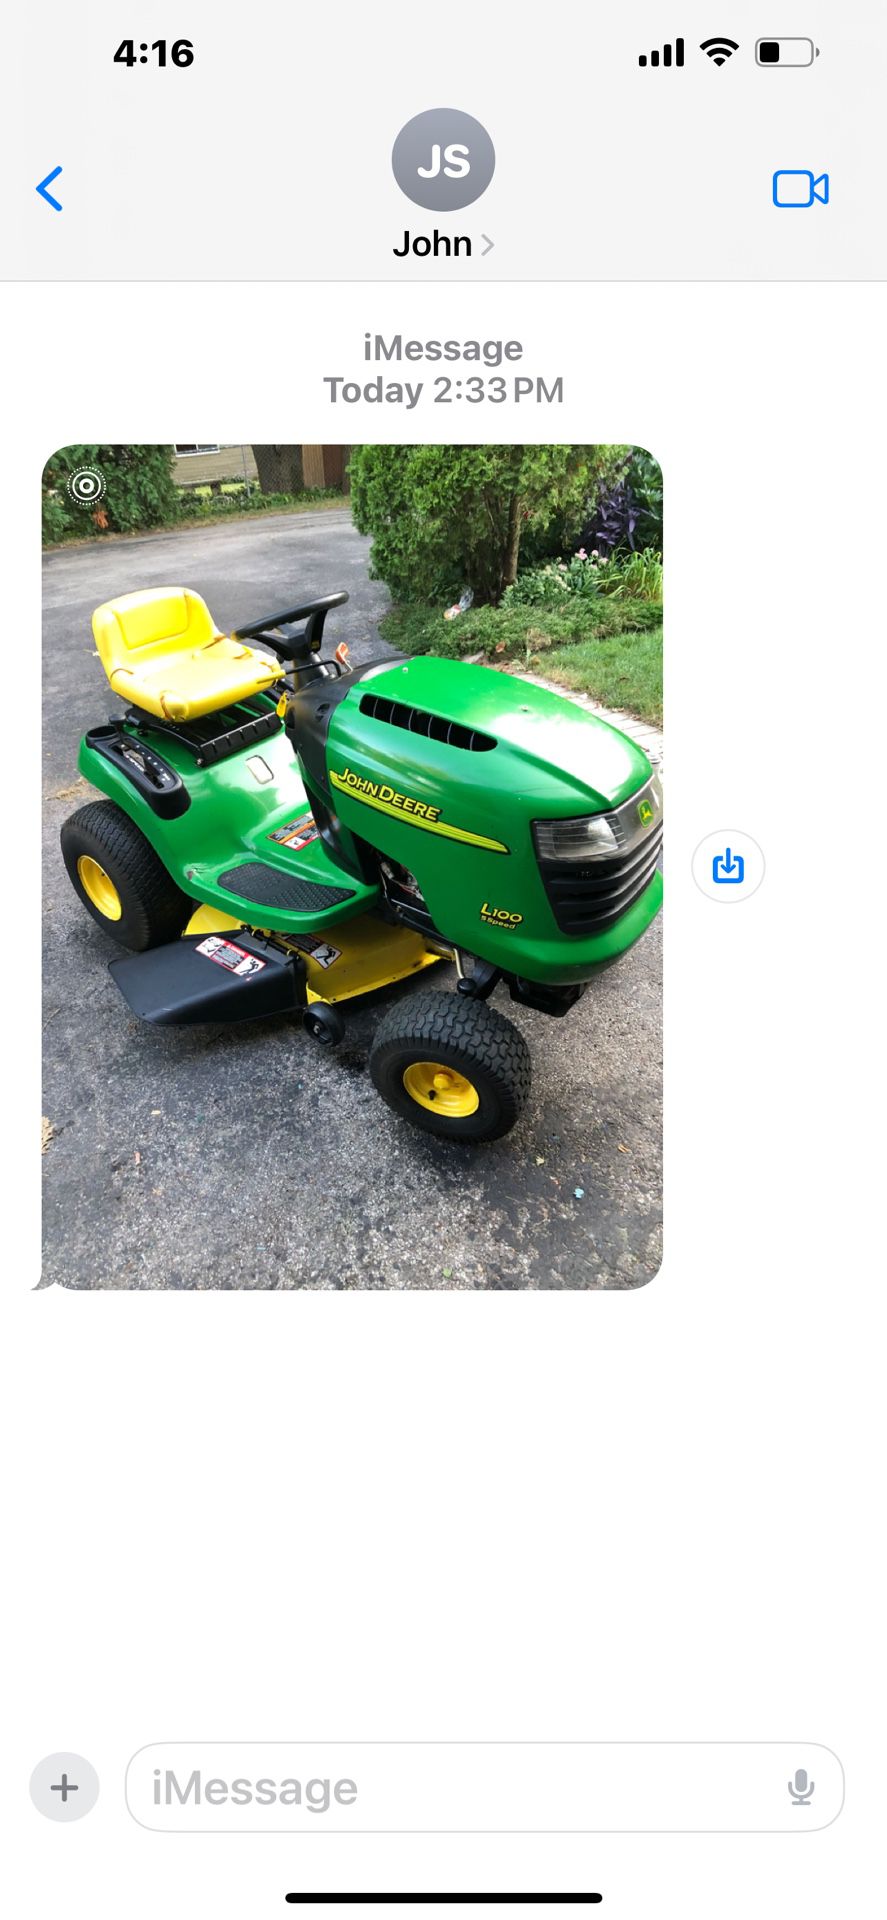 John Deere Riding Tractor With A Brand New Motor 100 $1800 Or Best Offer As Is Pick Up